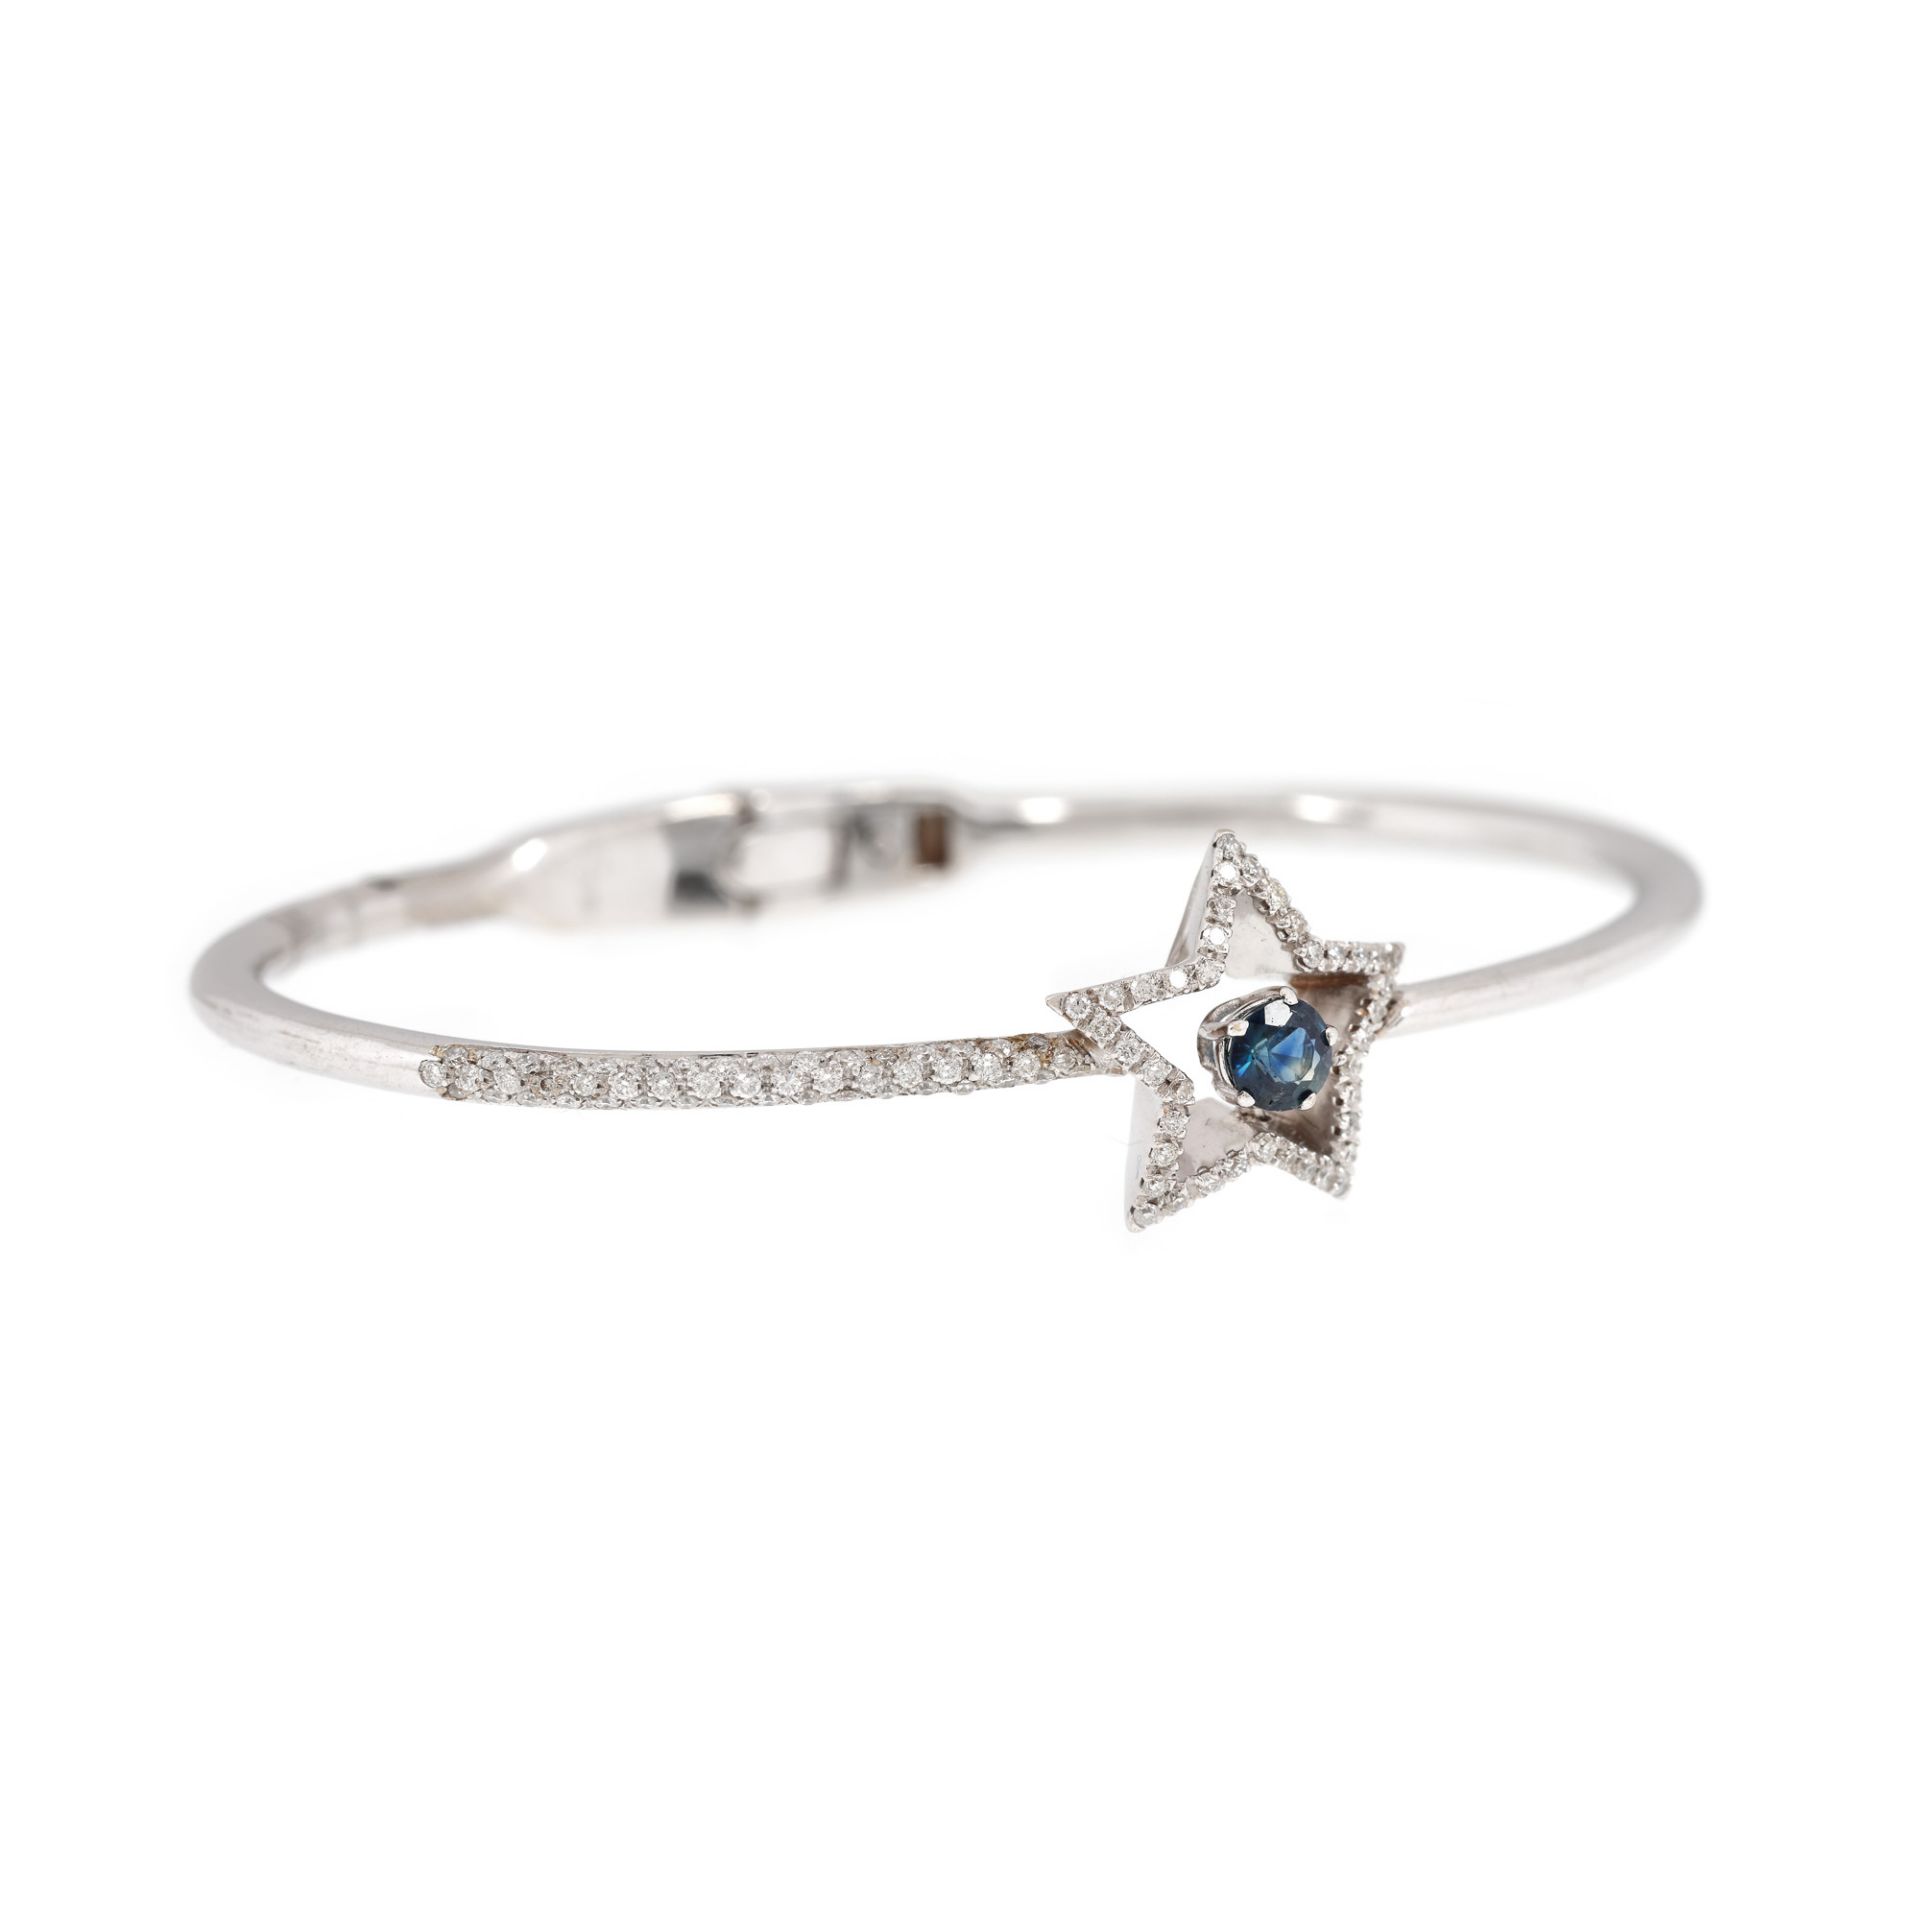 "Star" - white gold bracelet, decorated with diamonds and a central sapphire - Image 2 of 2